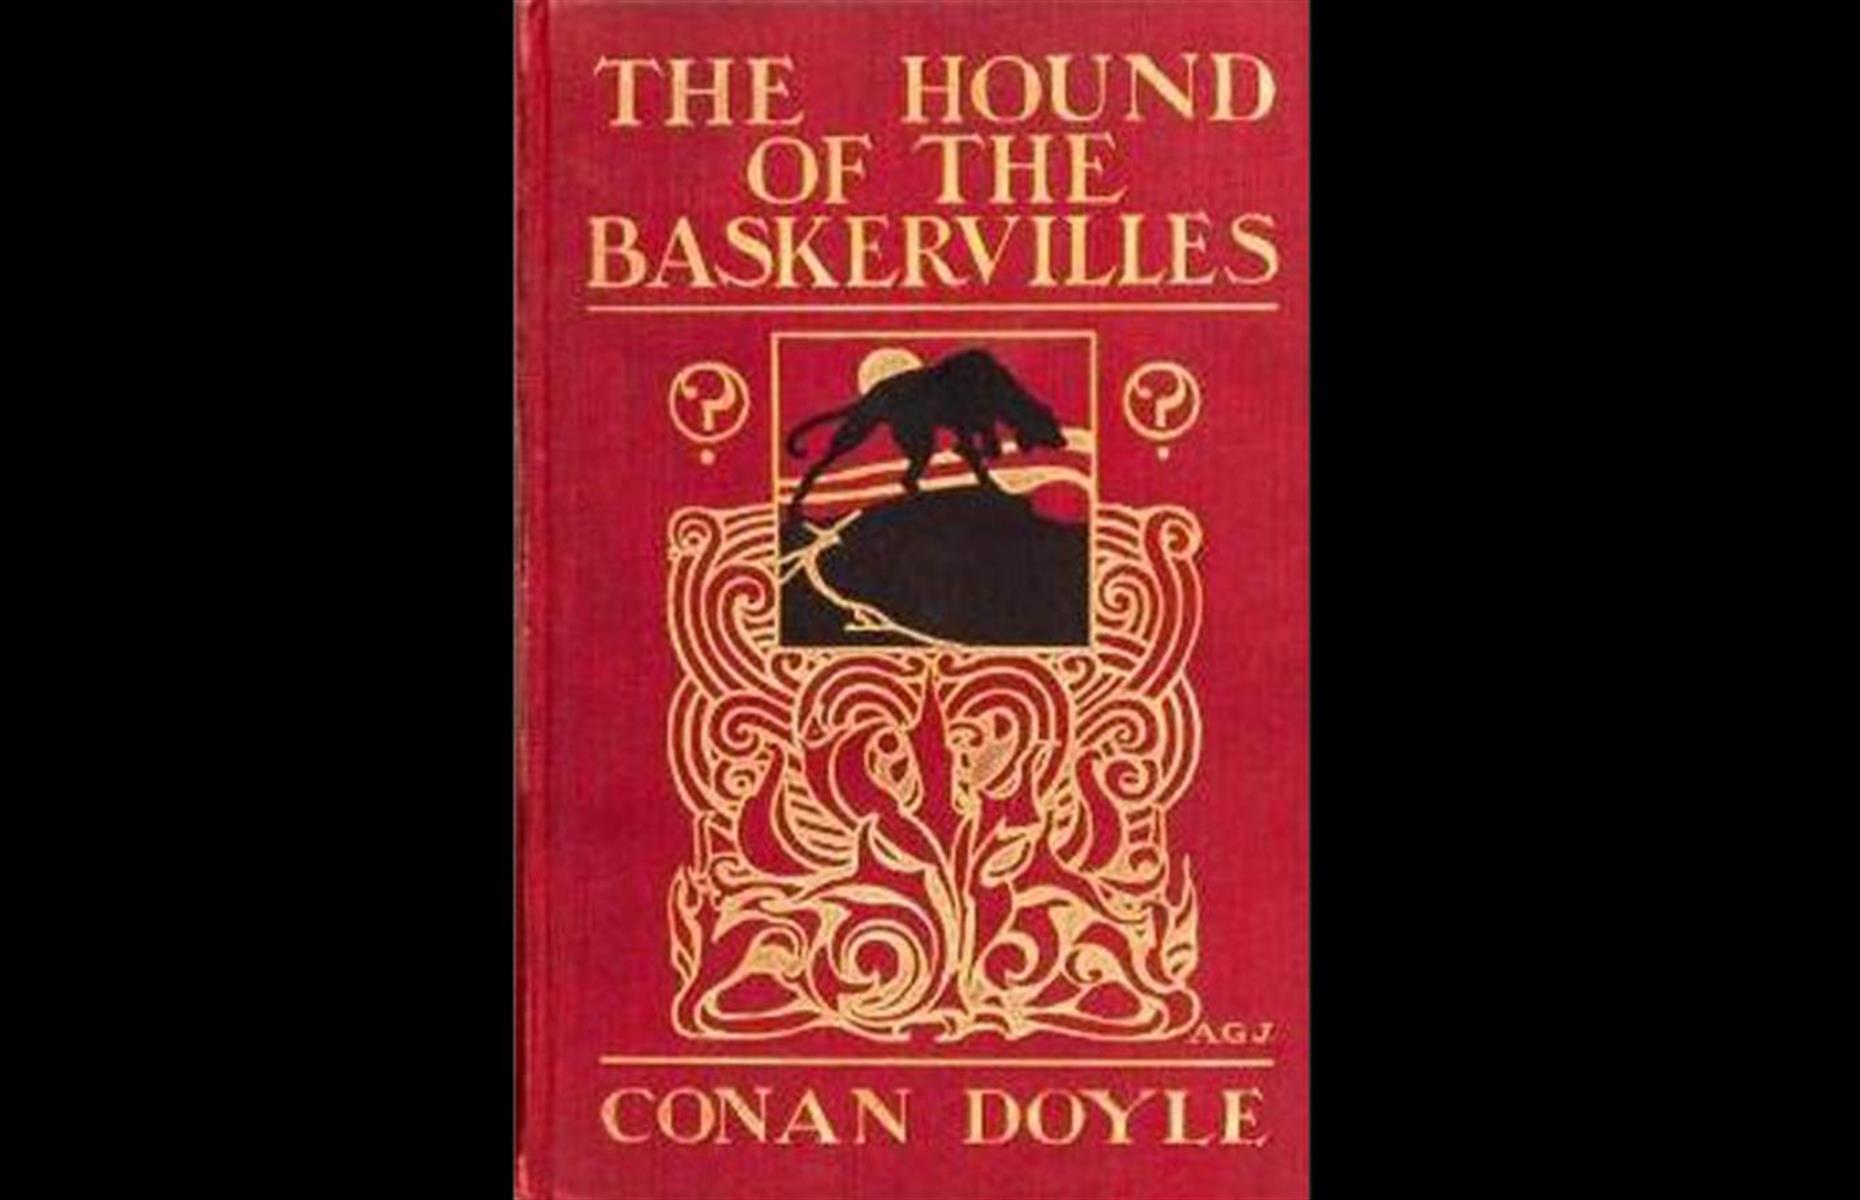 The Hound of the Baskervilles: up to $25,000 (£20,175)